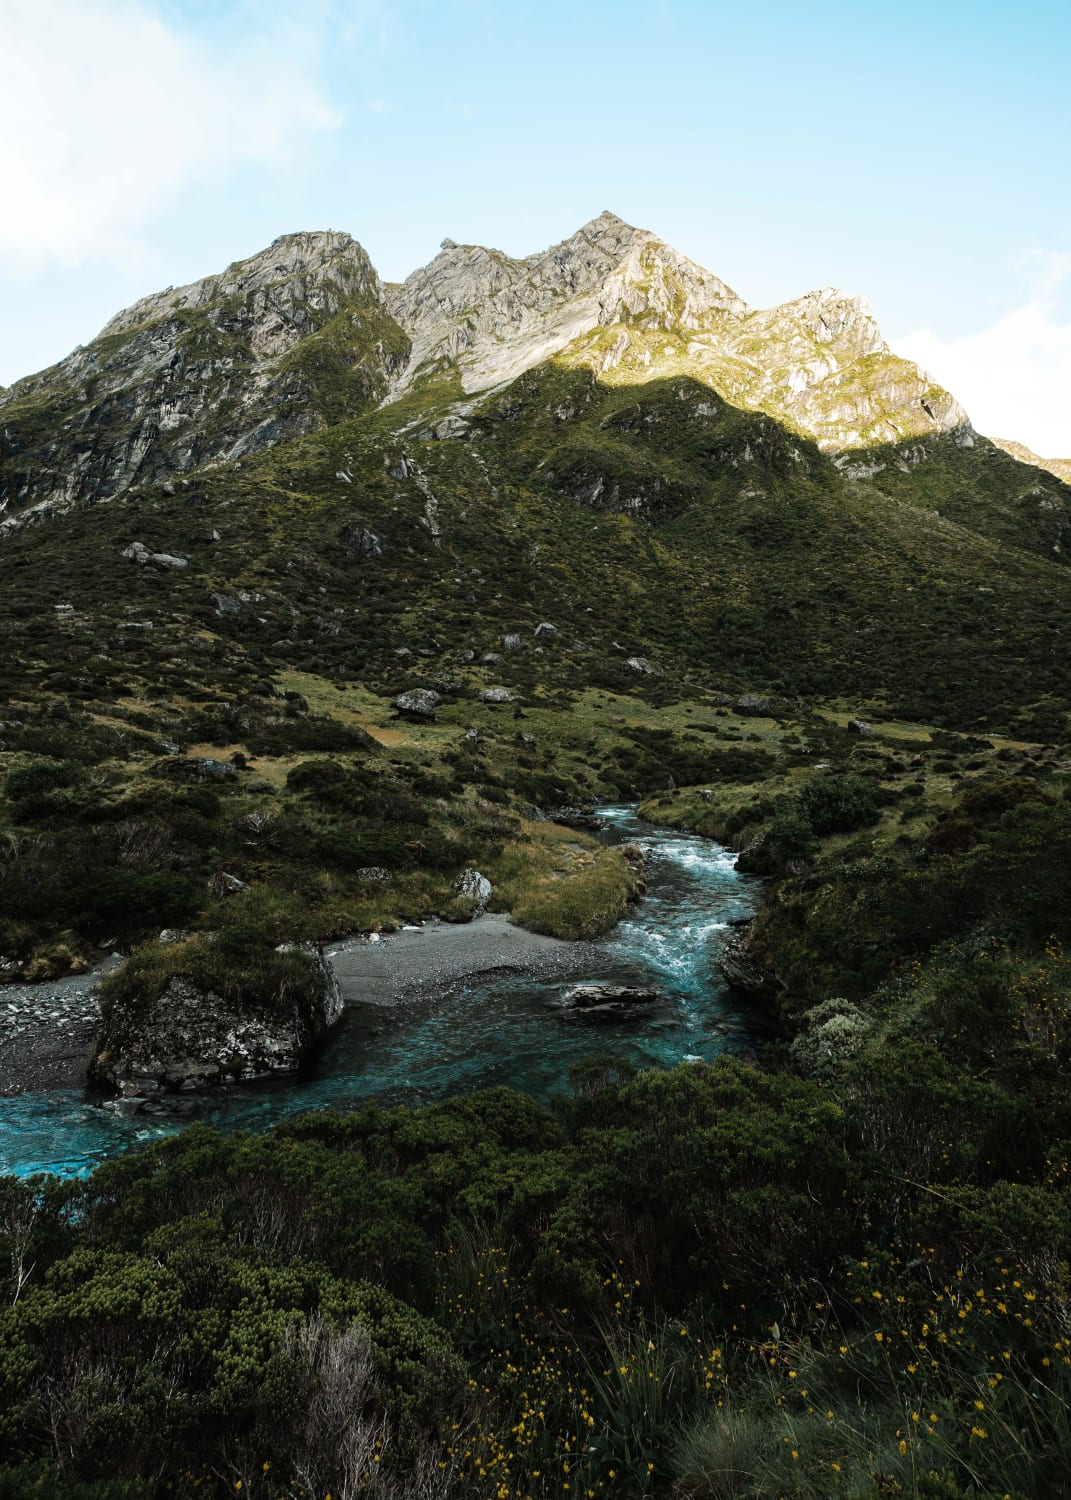 Going backpacking in New Zealand feels like you're on a different planet